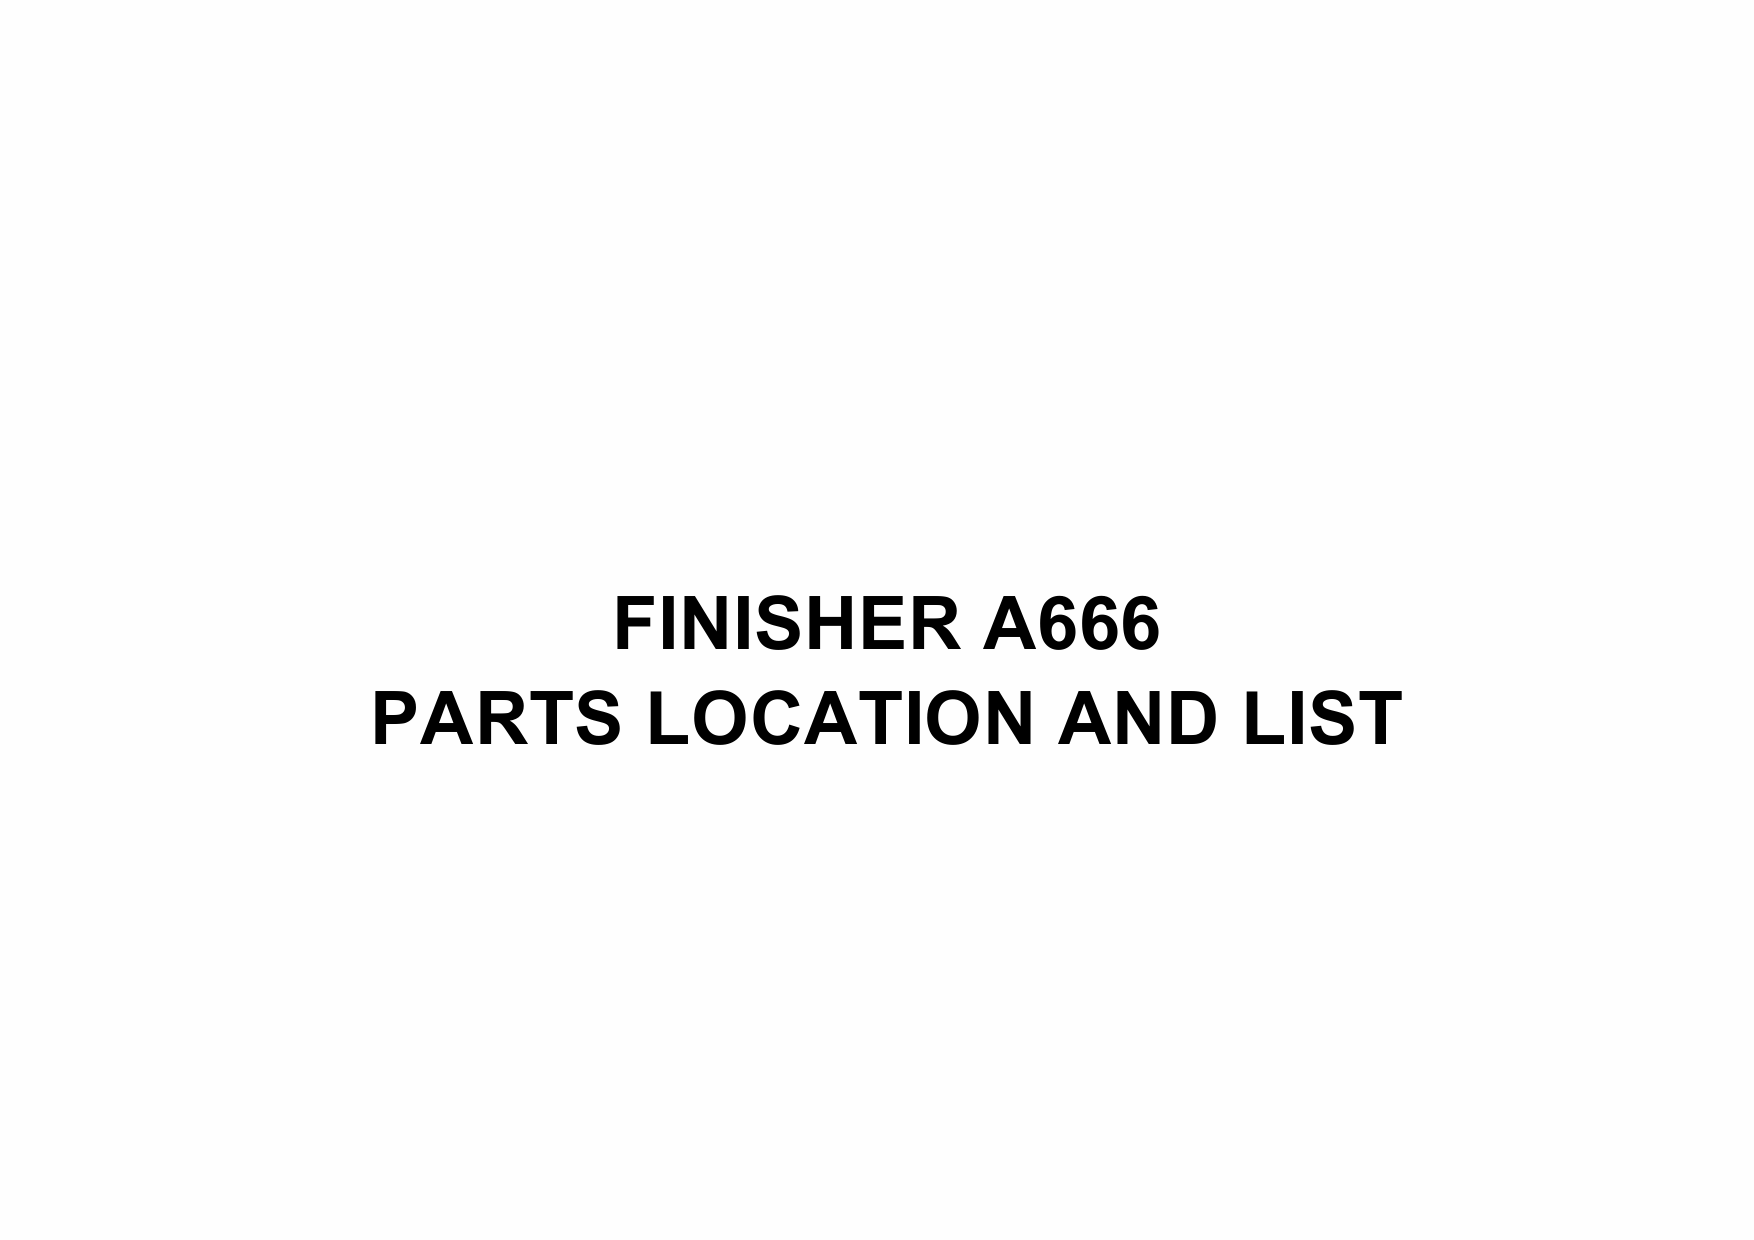 RICOH Options A666 FINISHER Parts Catalog PDF download-1